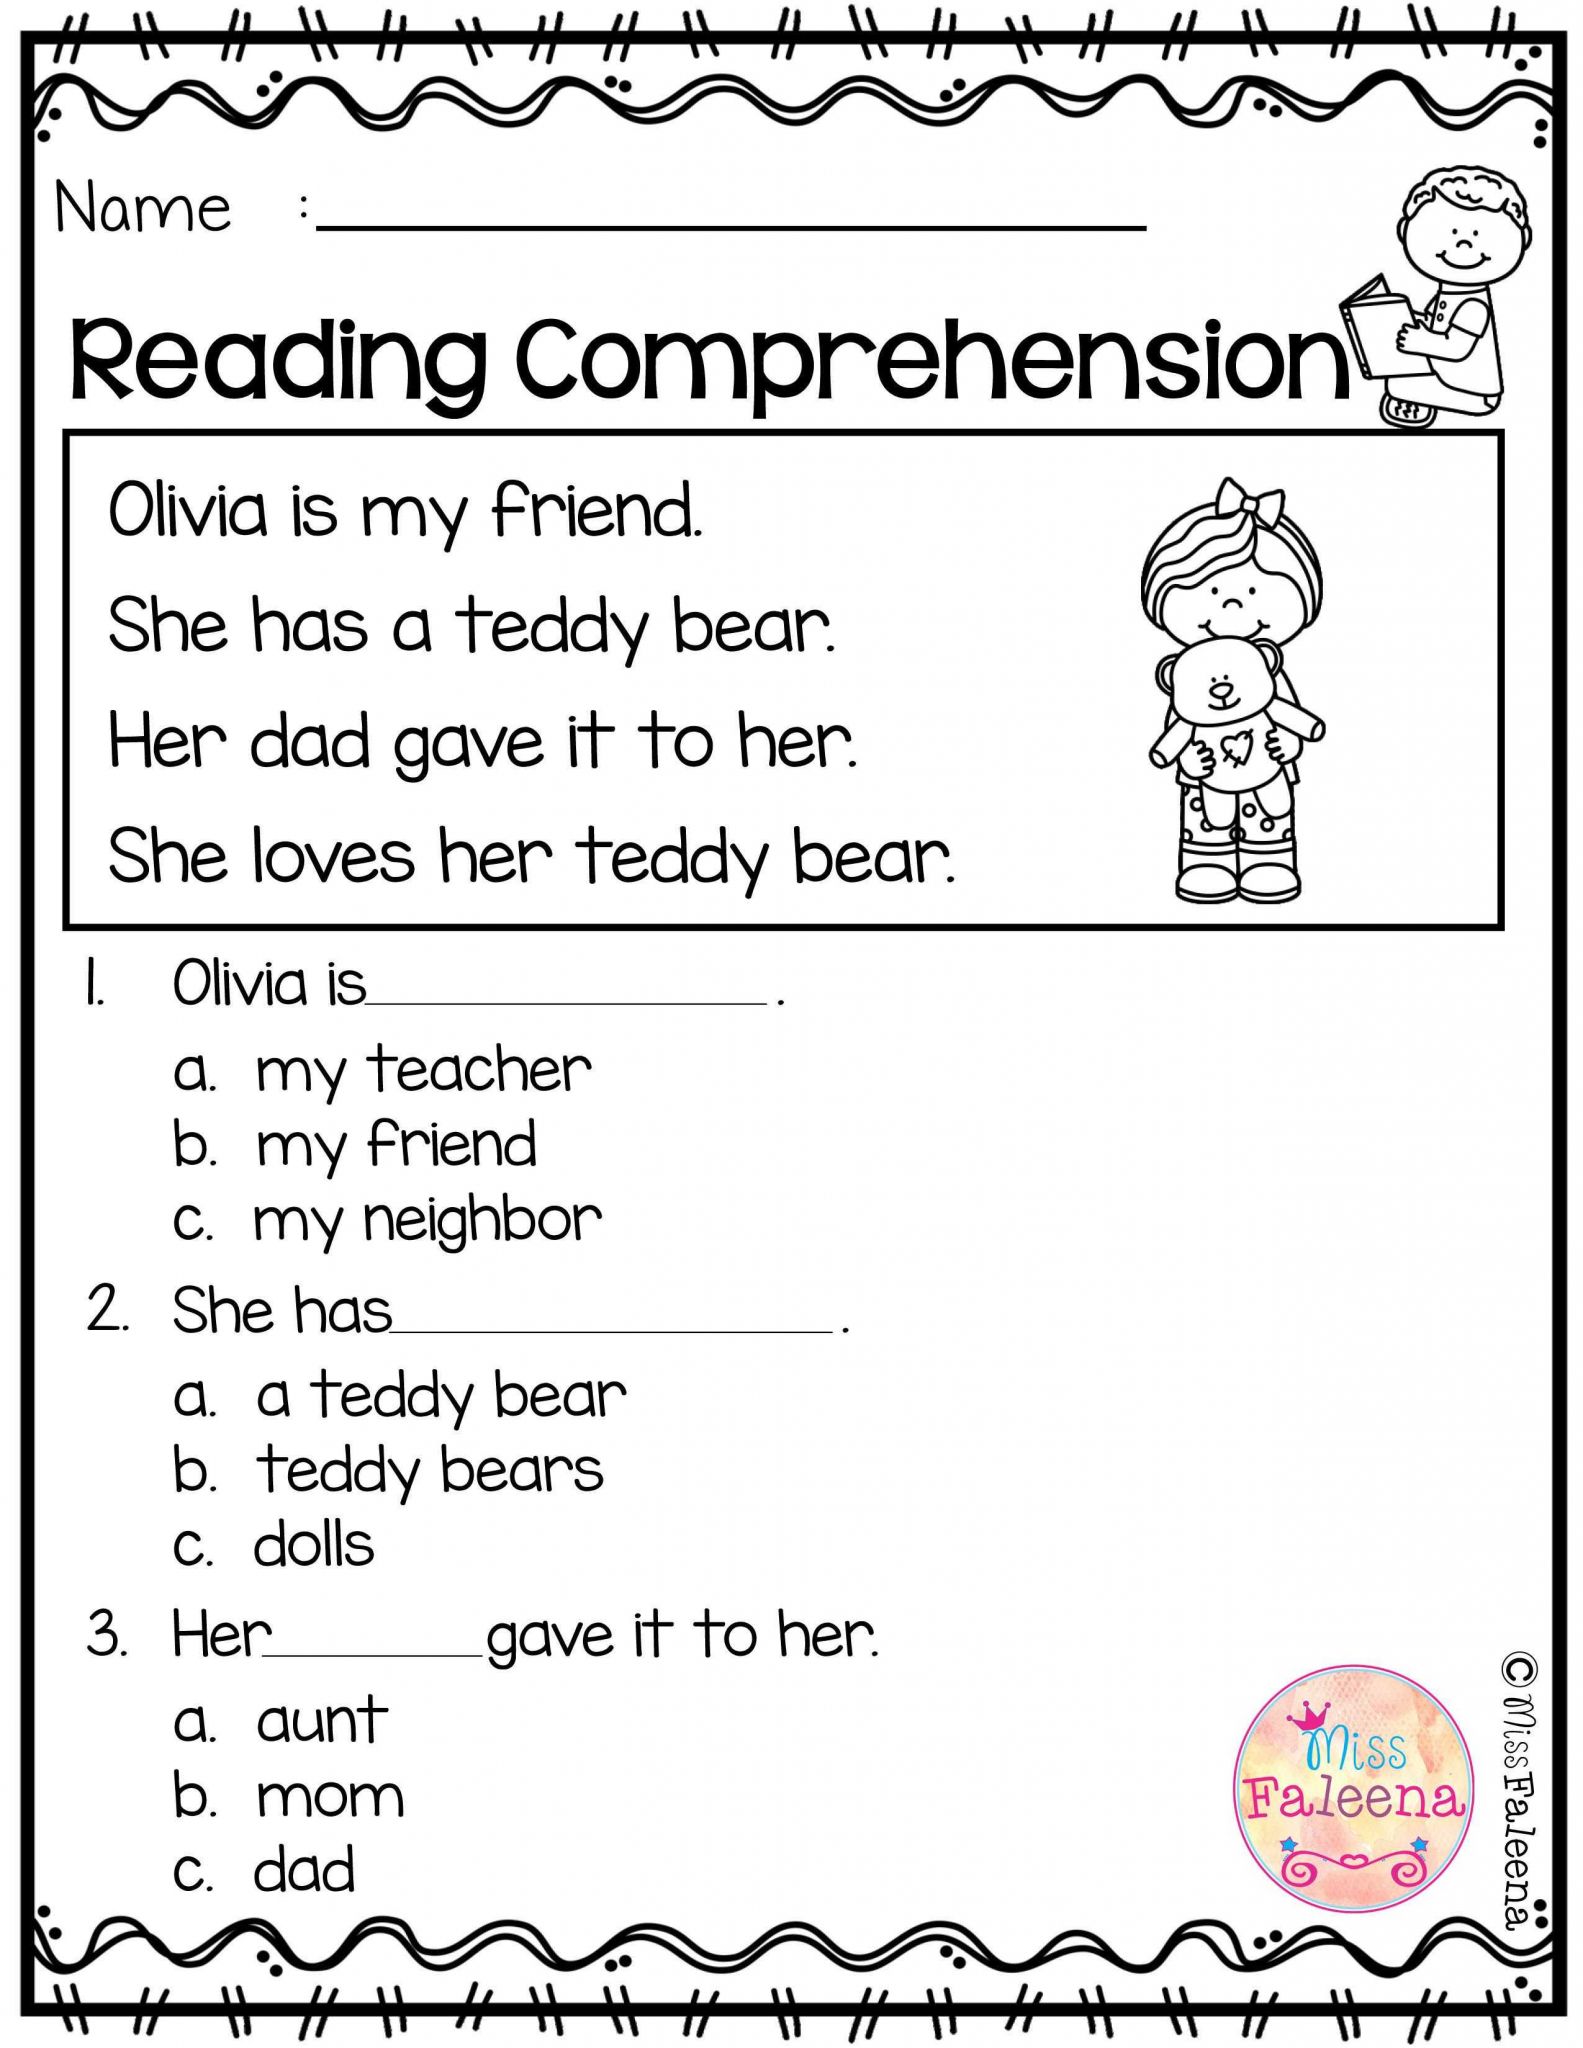 Spanish Reading Comprehension Worksheets and Reading Prehension Worksheets Multiple Choice Hd